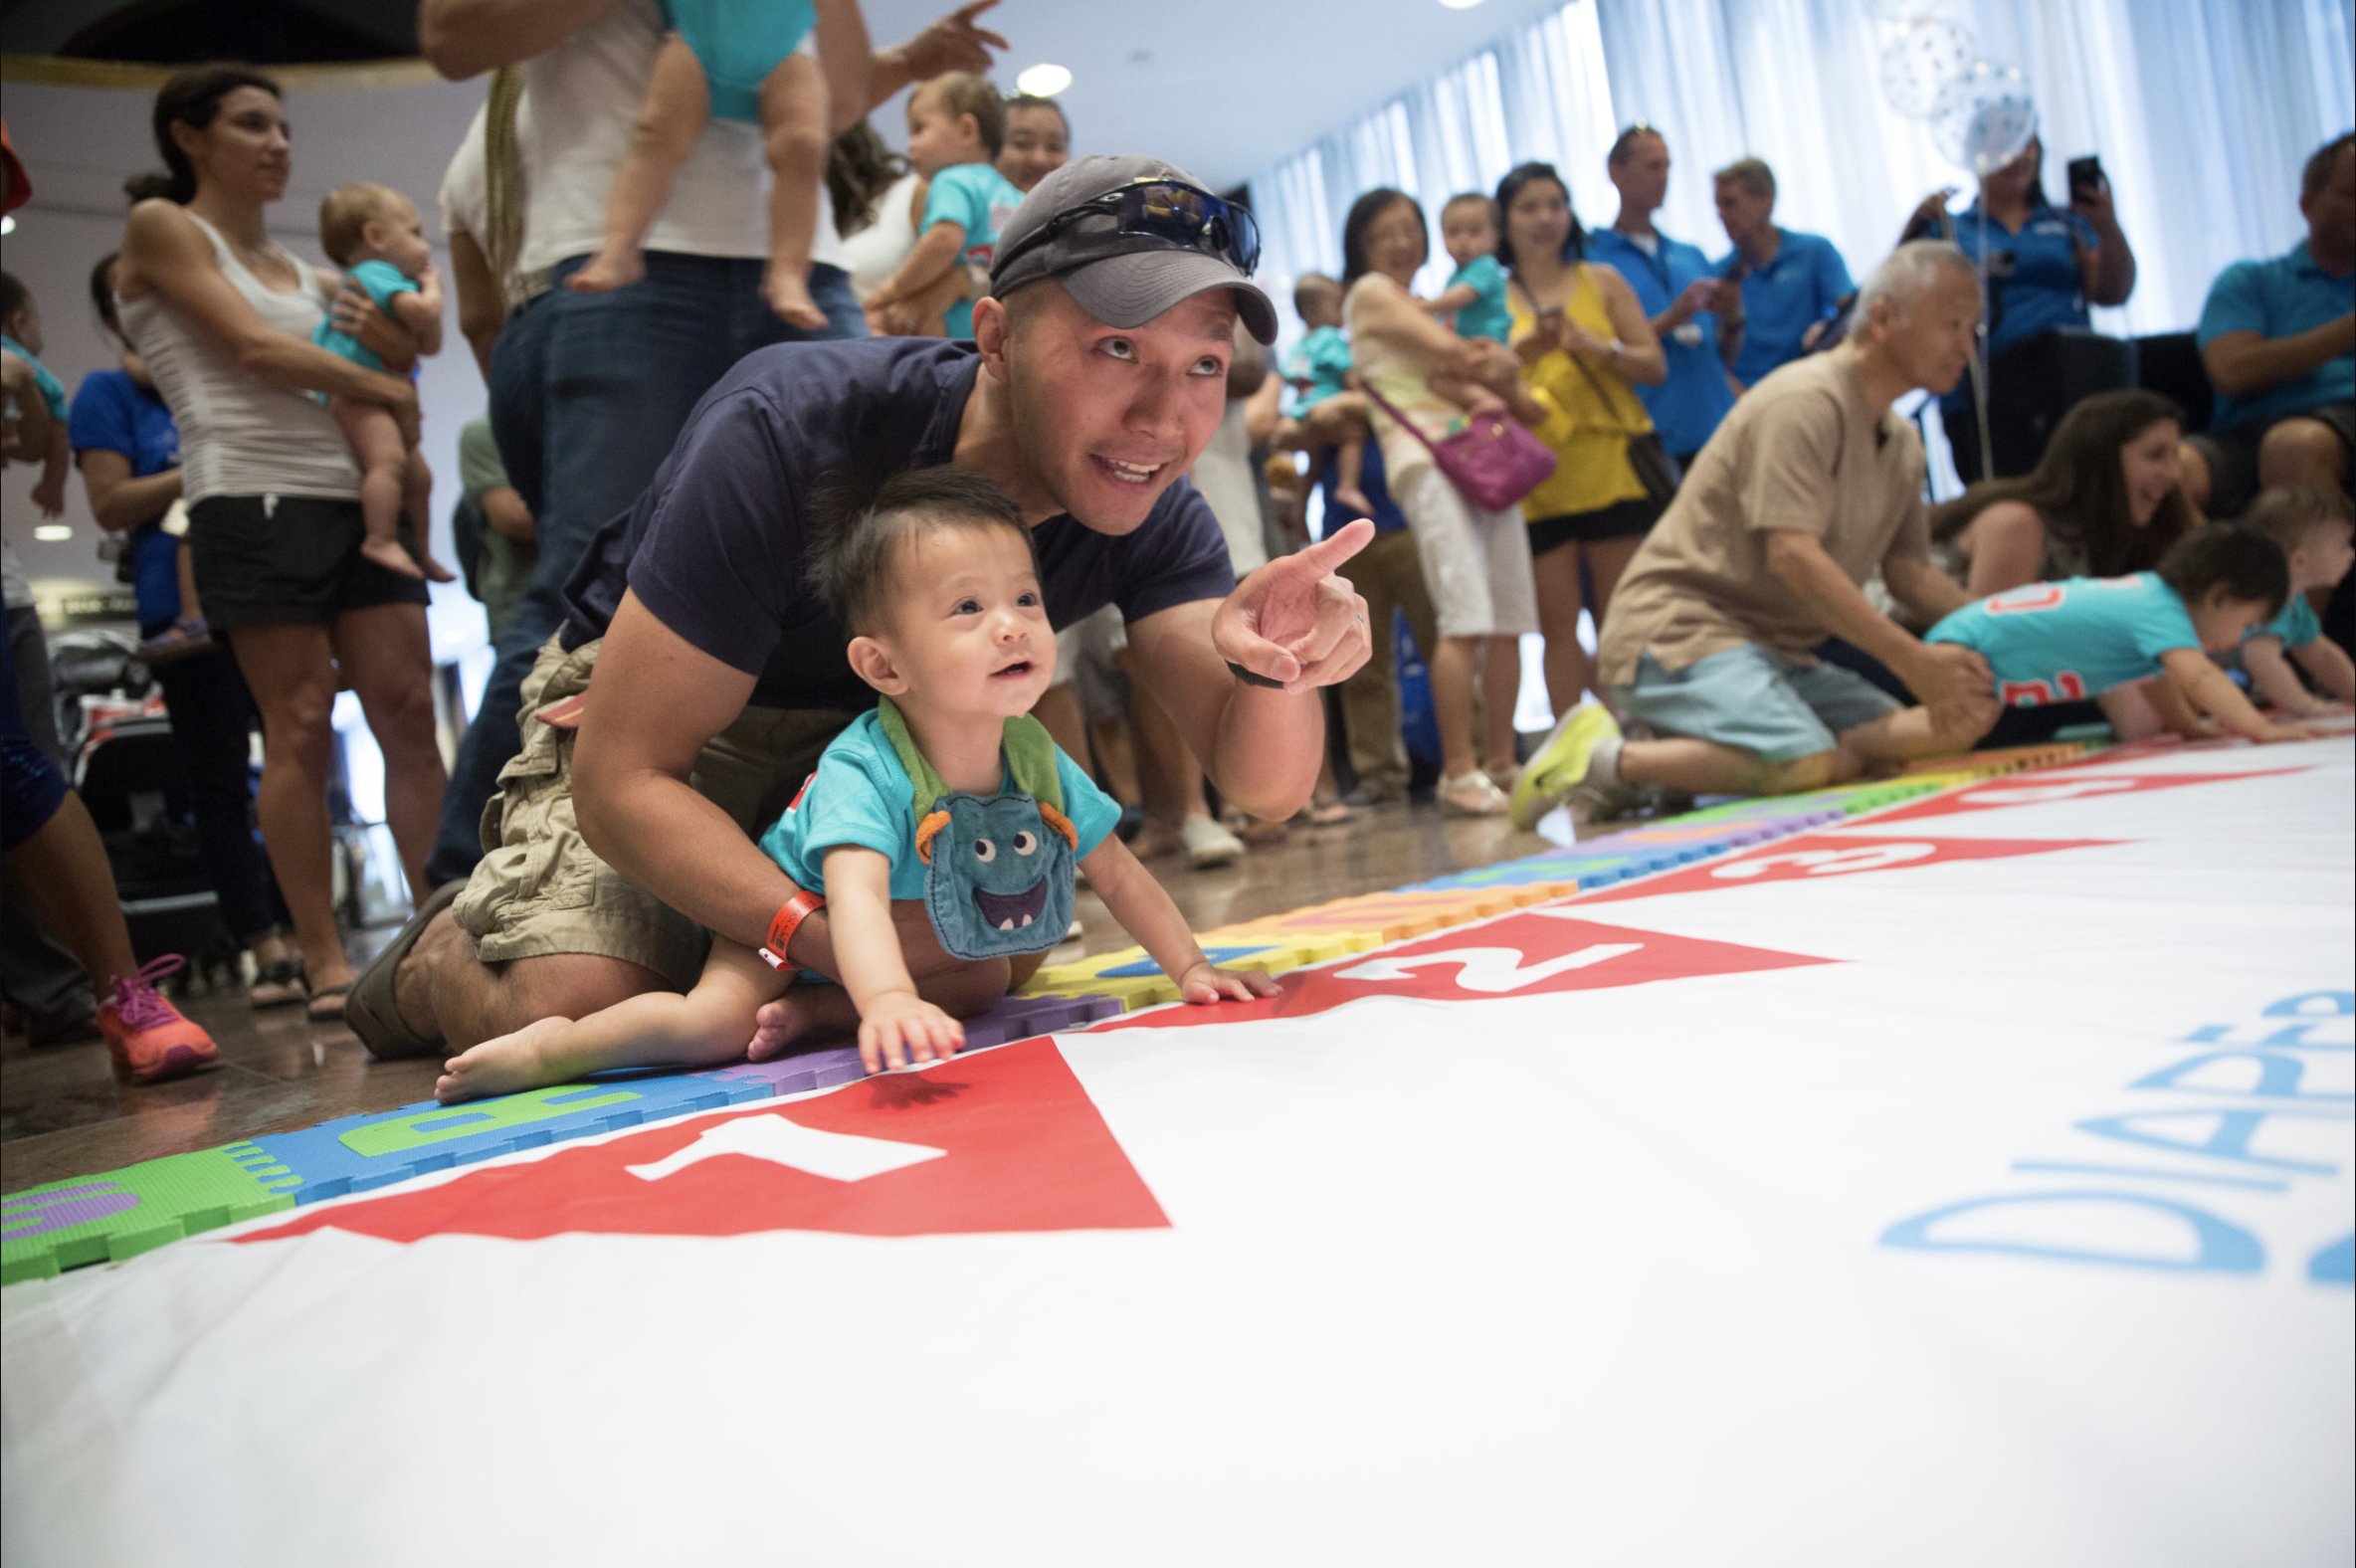 The “Life Time Diaper Derby” for 25 babies ages 6 to 12 months was held Friday at the Miami Famous Expo